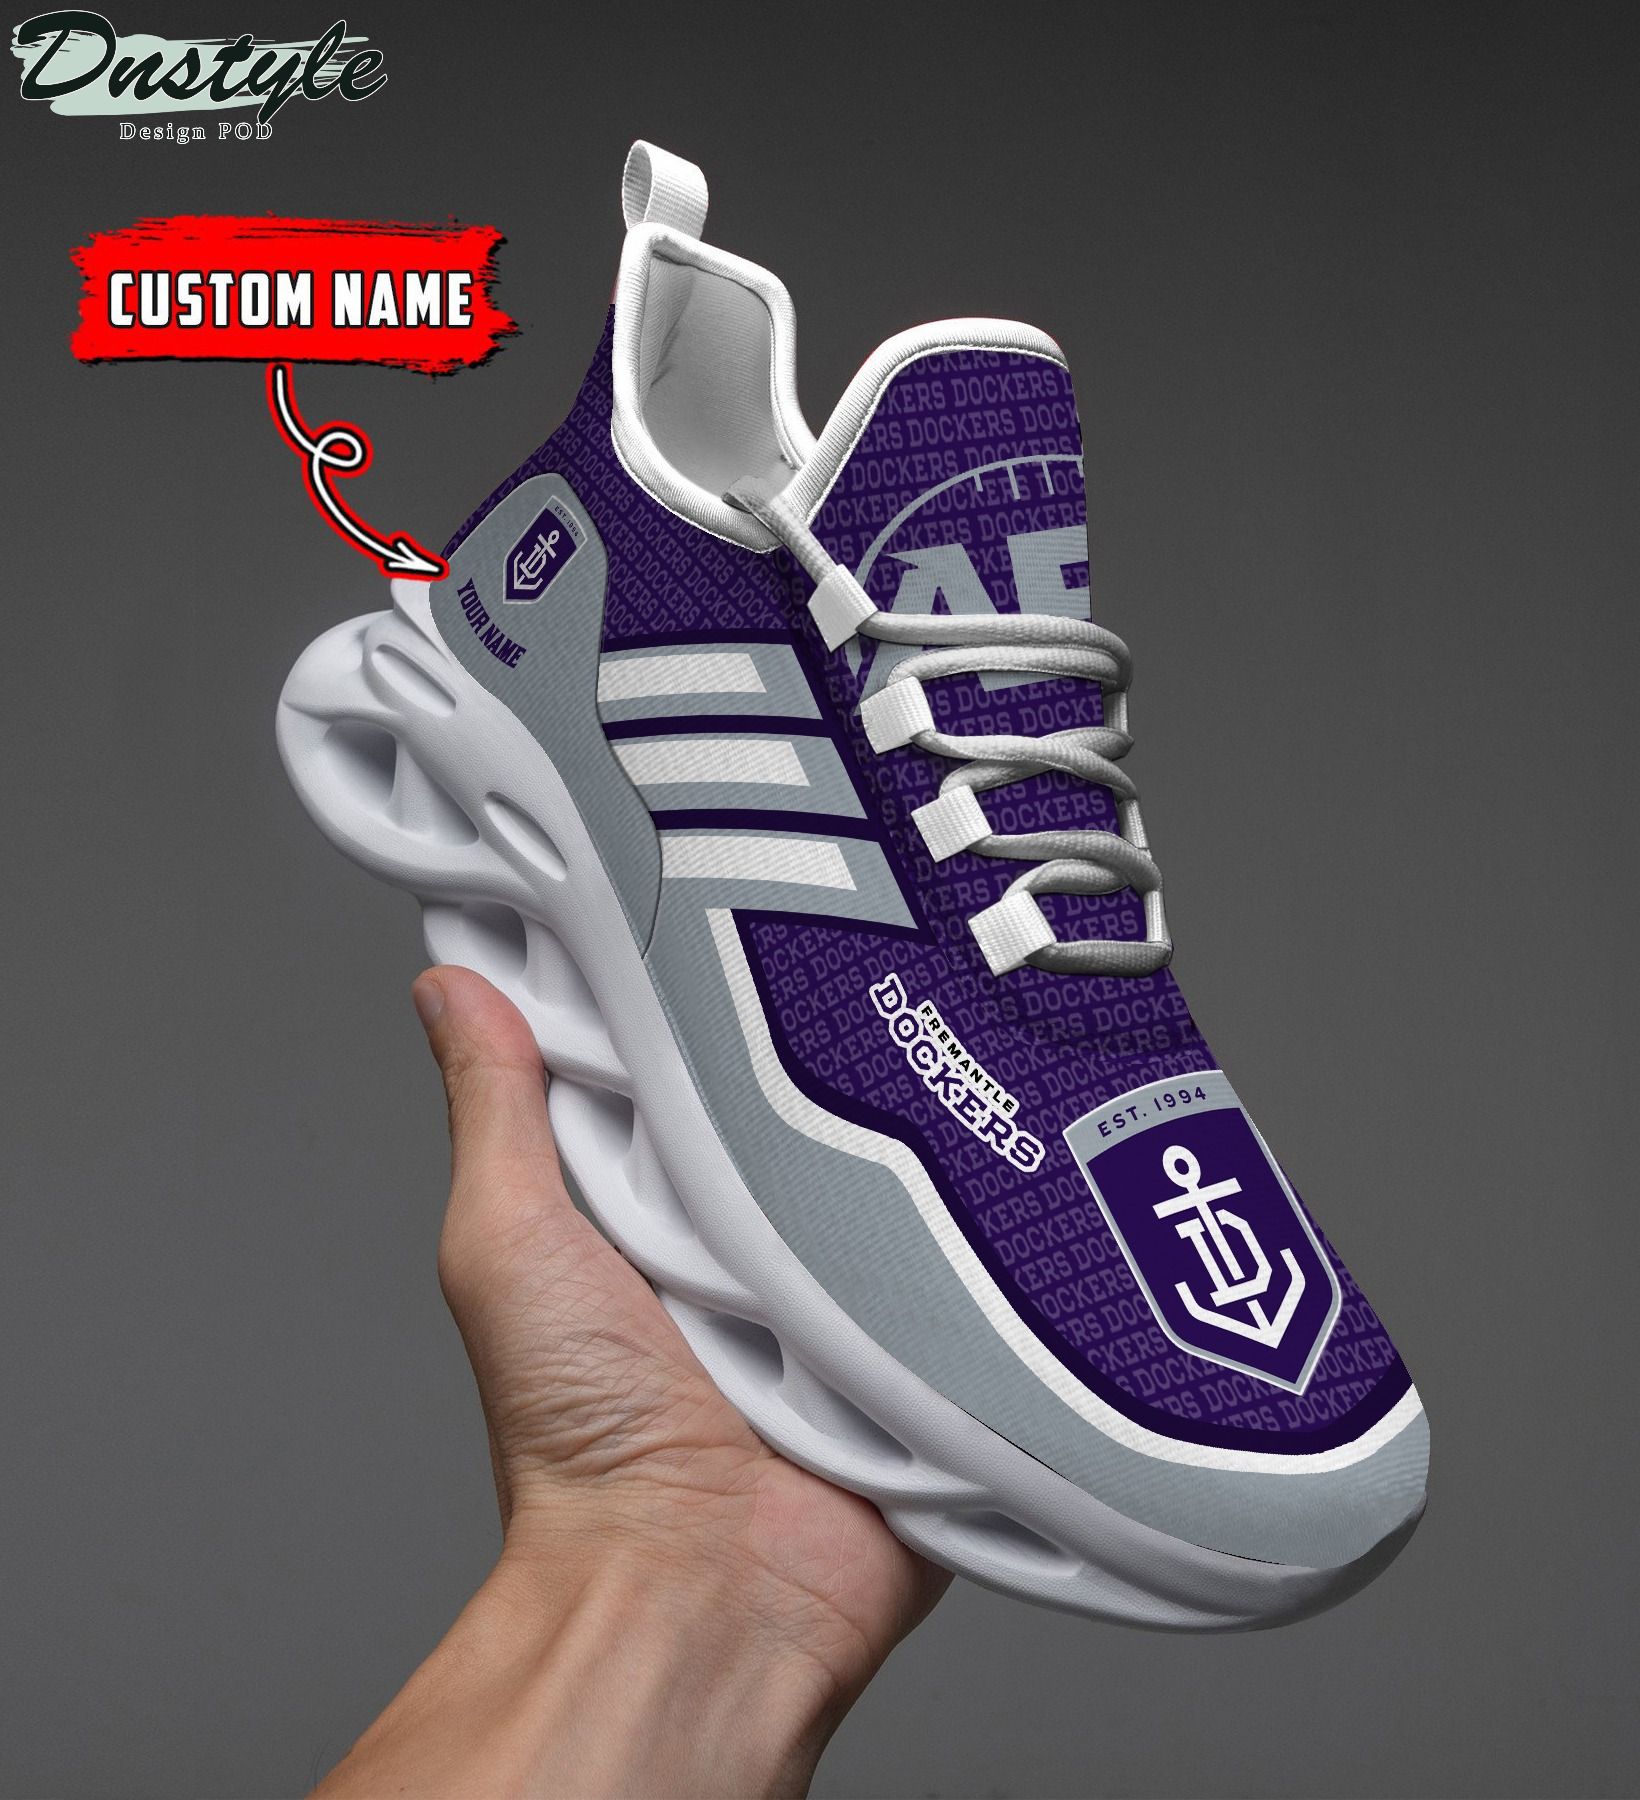 Fremantle Dockers AFL personalized clunky max soul shoes